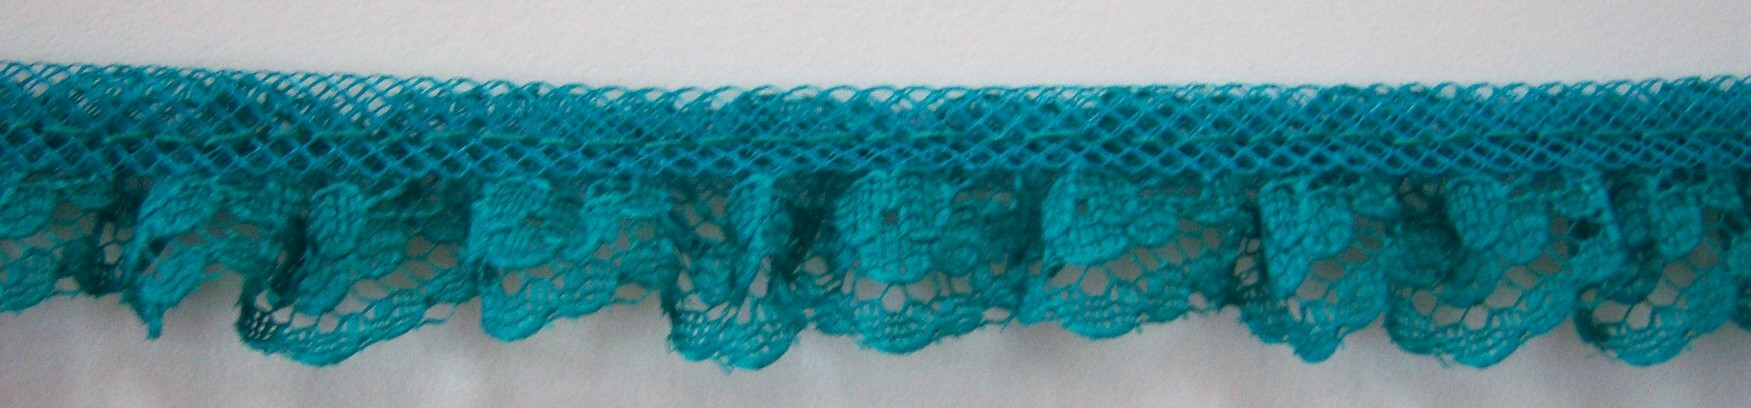 Teal 3/4" Ruffled Lace